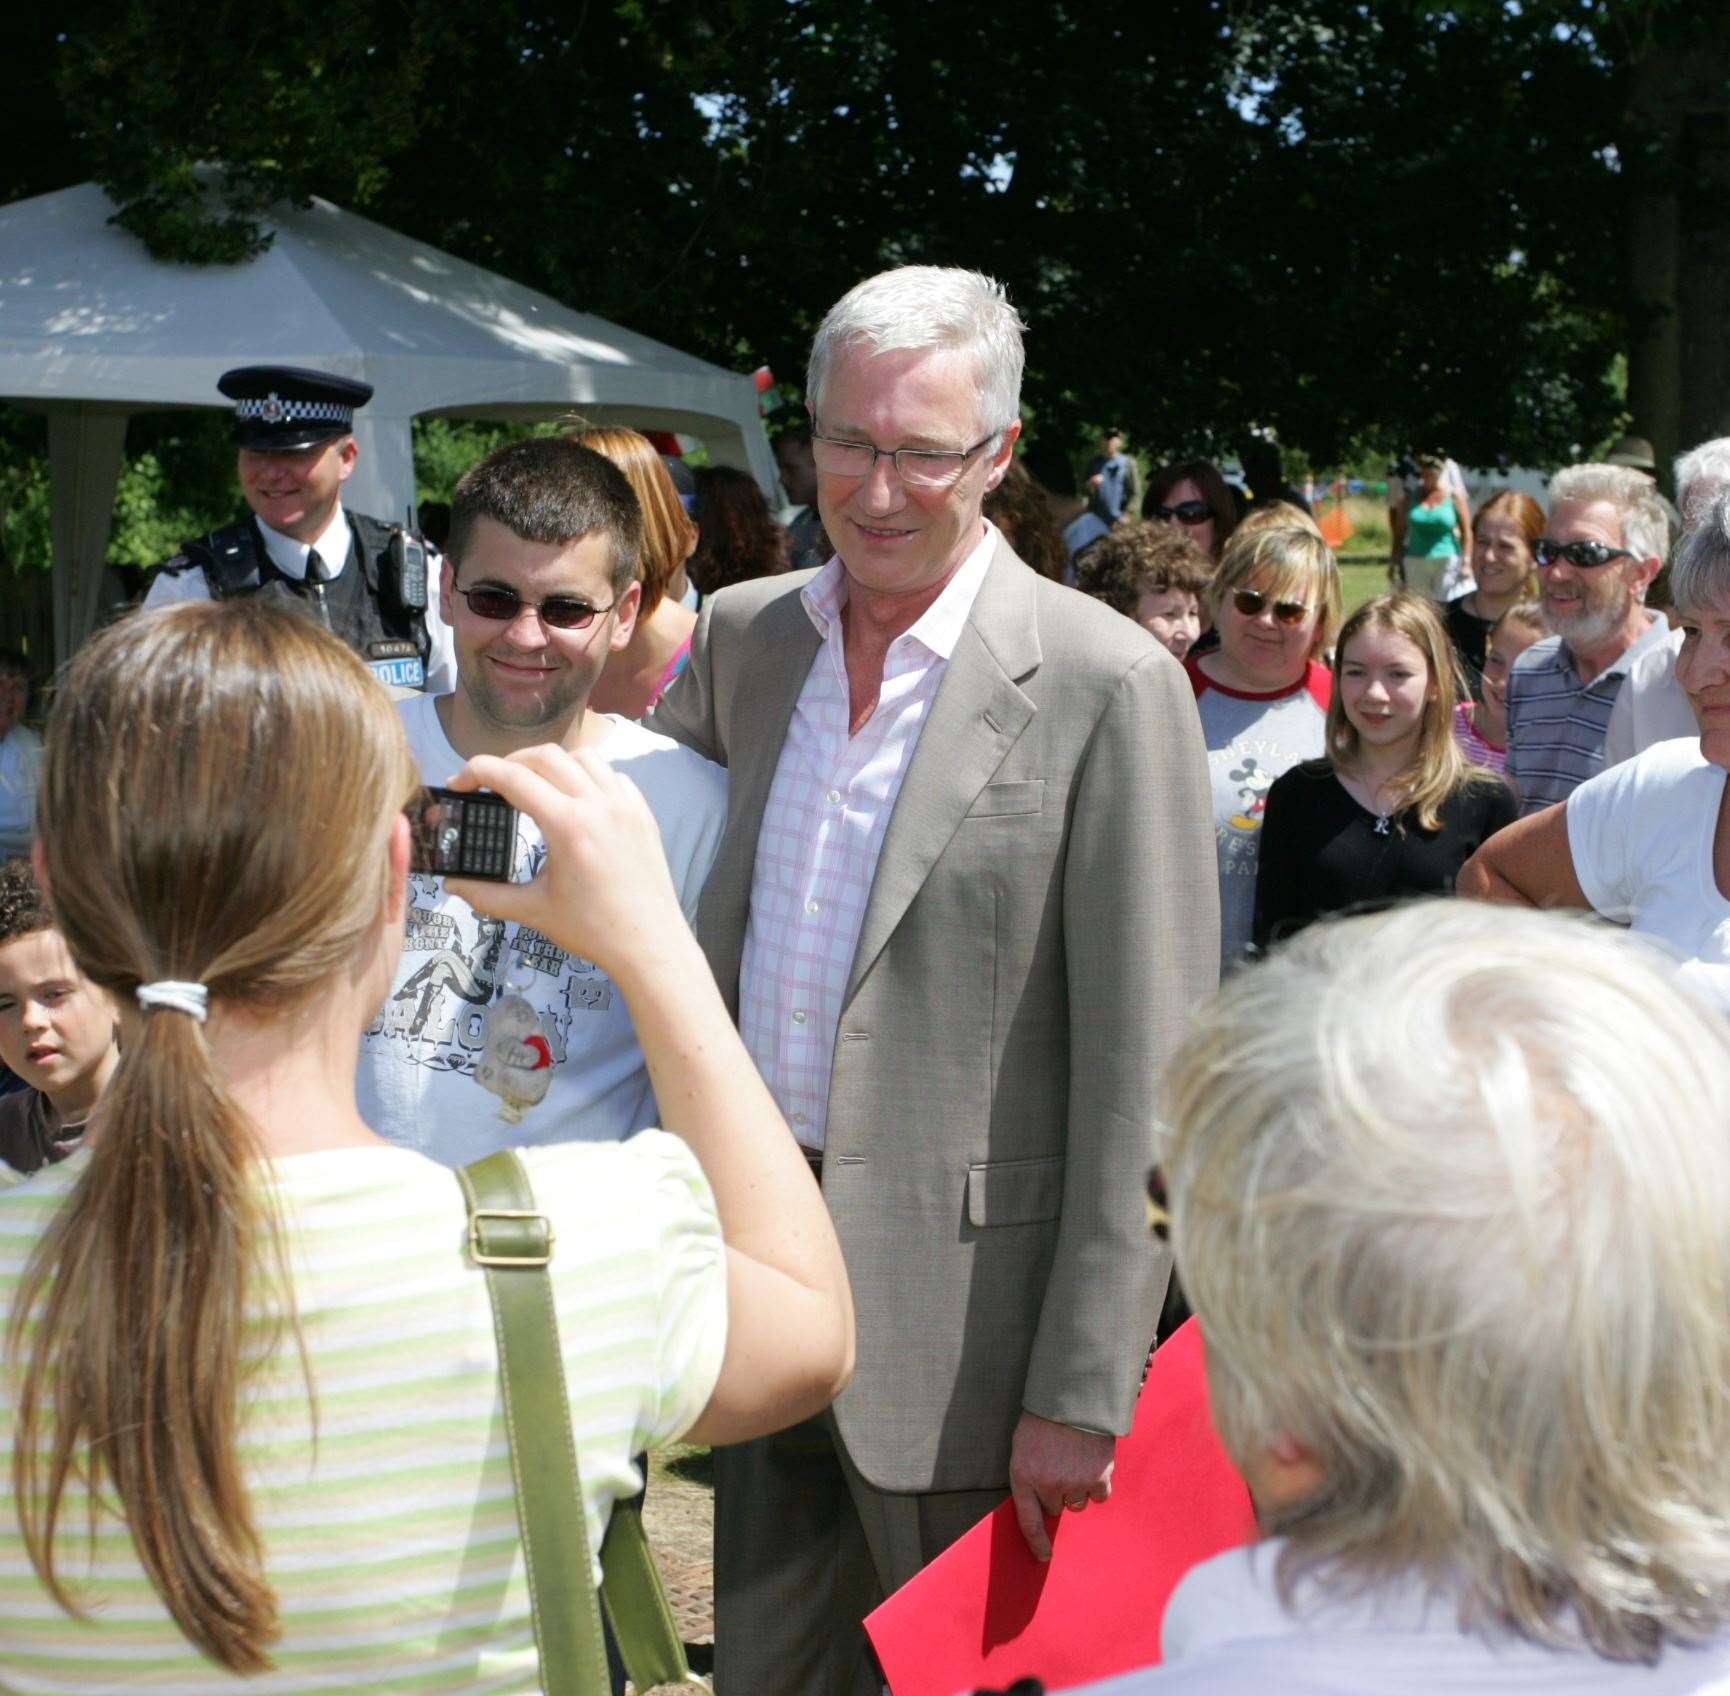 Paul O'Grady having his picture taken with fans in 2008 at Aldington Primary School Summer Fete. Picture: Martin Apps